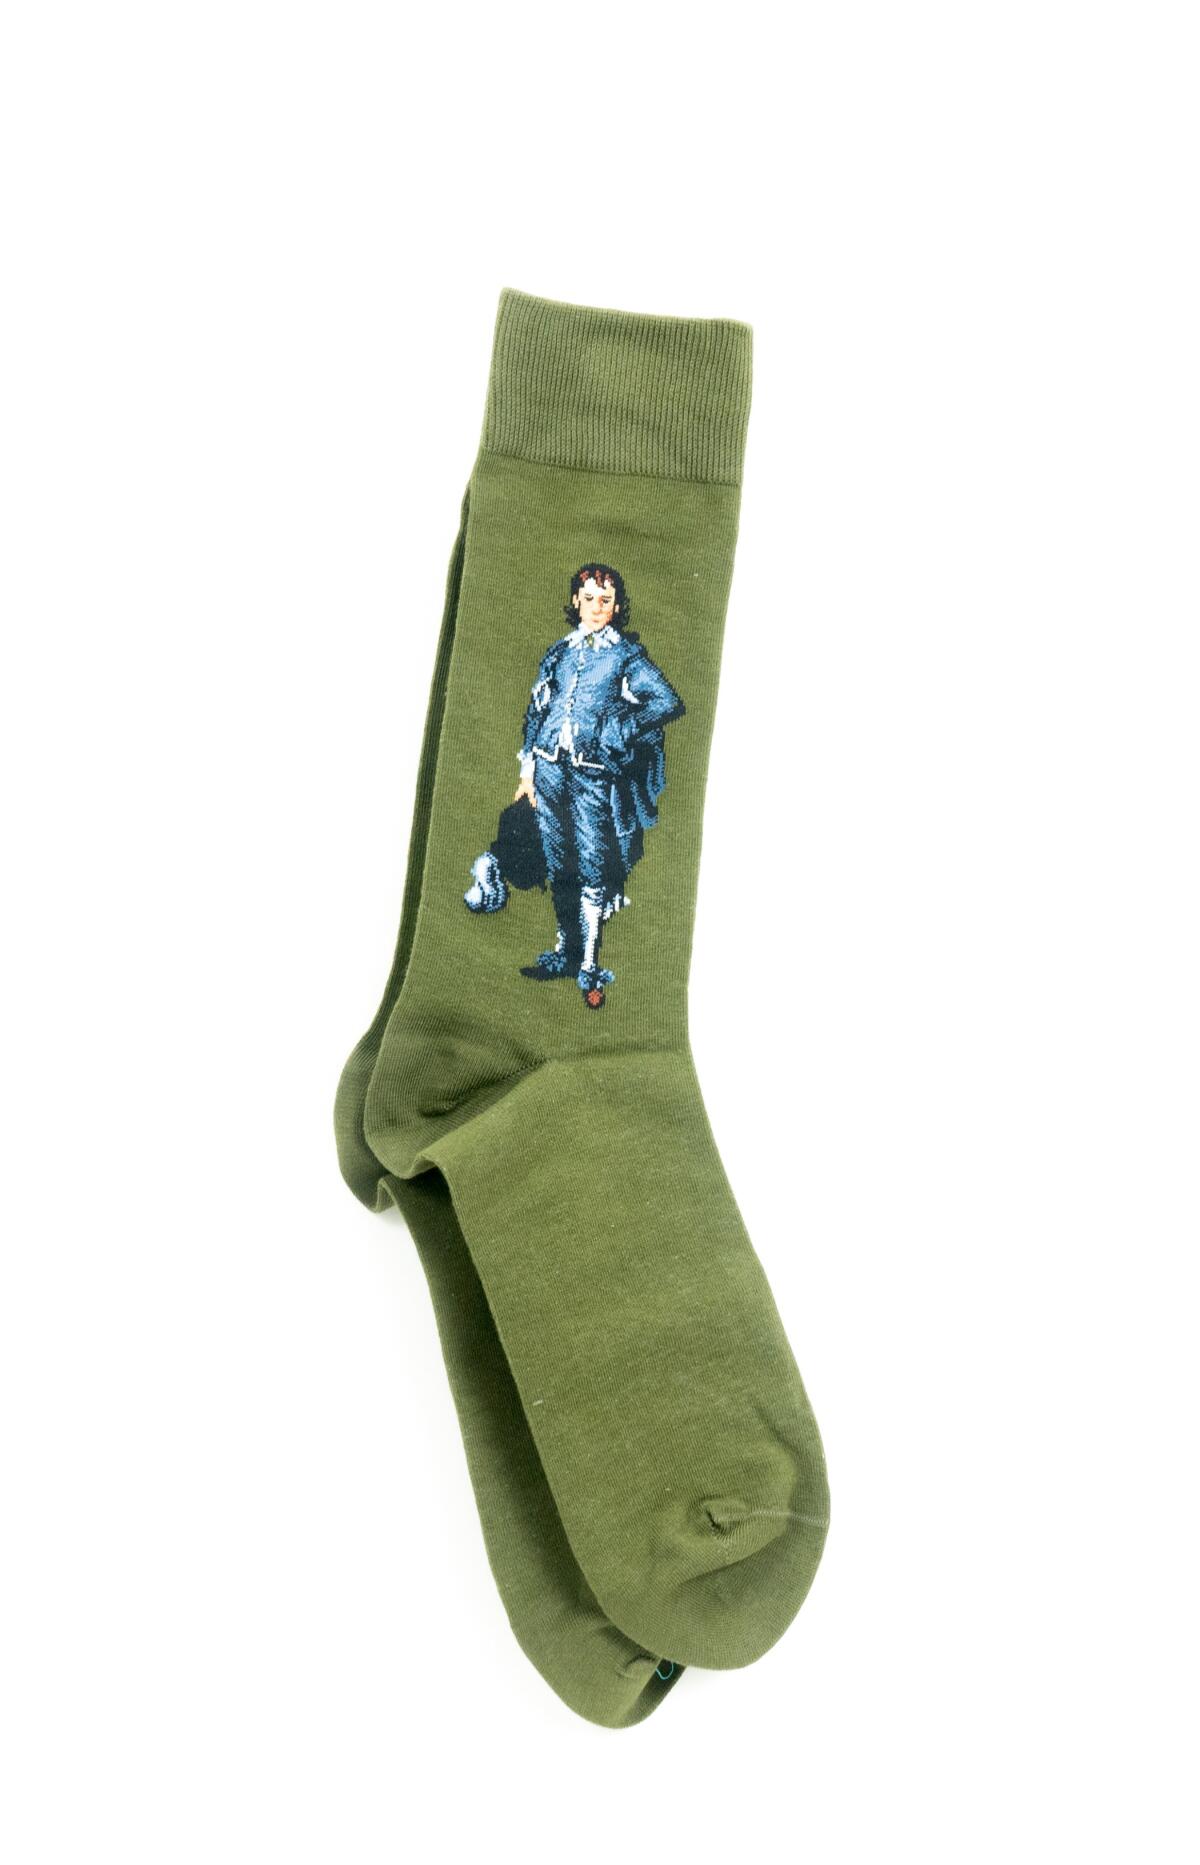 Green socks bearing the image of a man dressed in blue. 